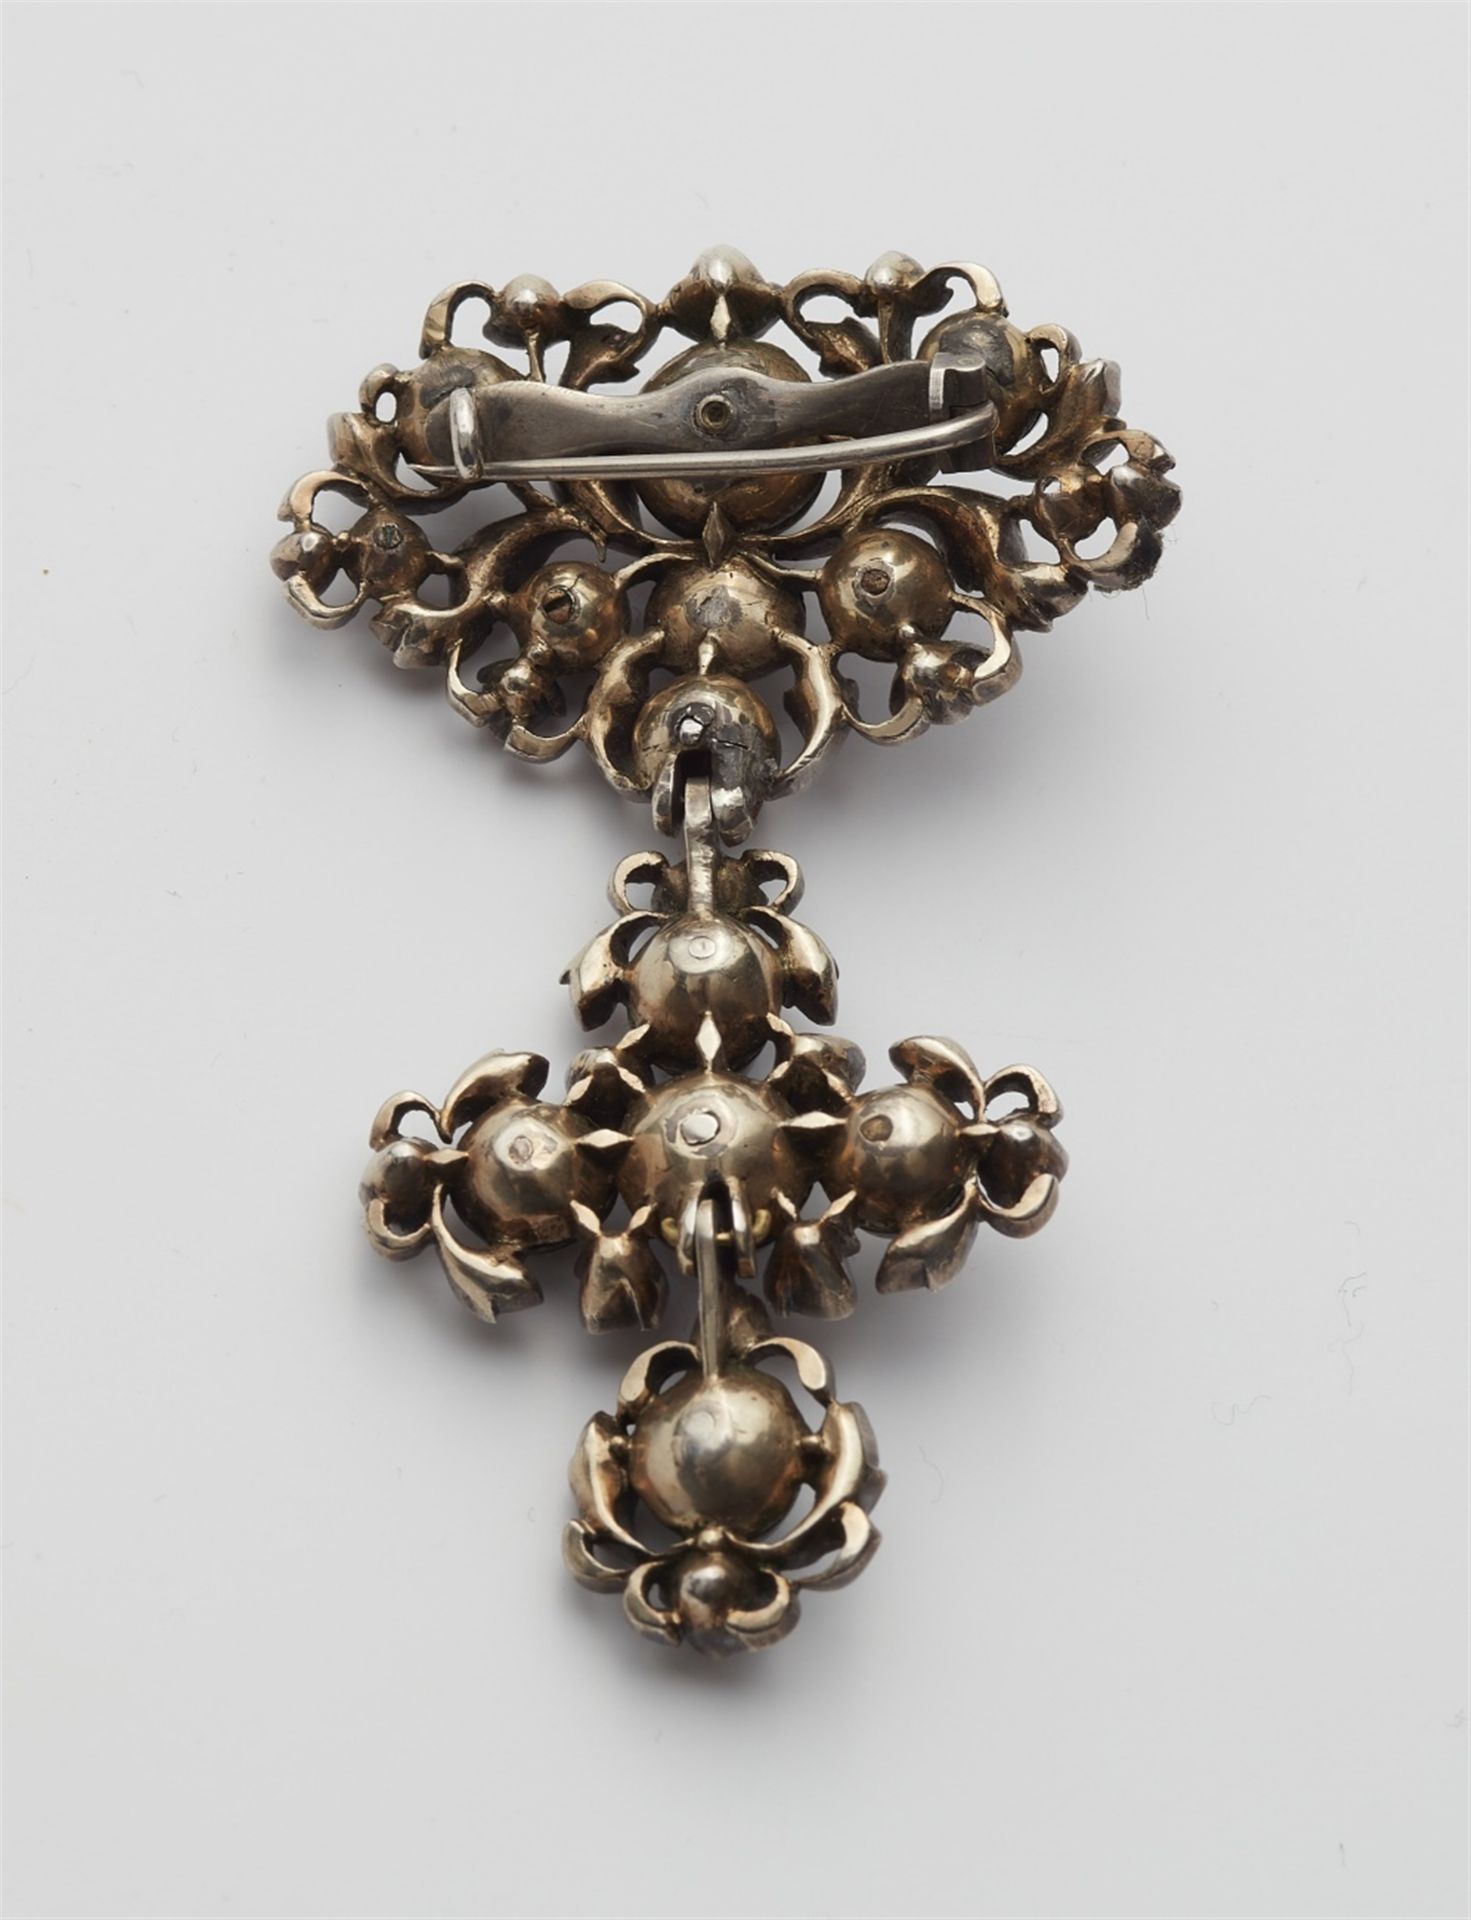 A Baroque brooch with a cross pendant - Image 2 of 2